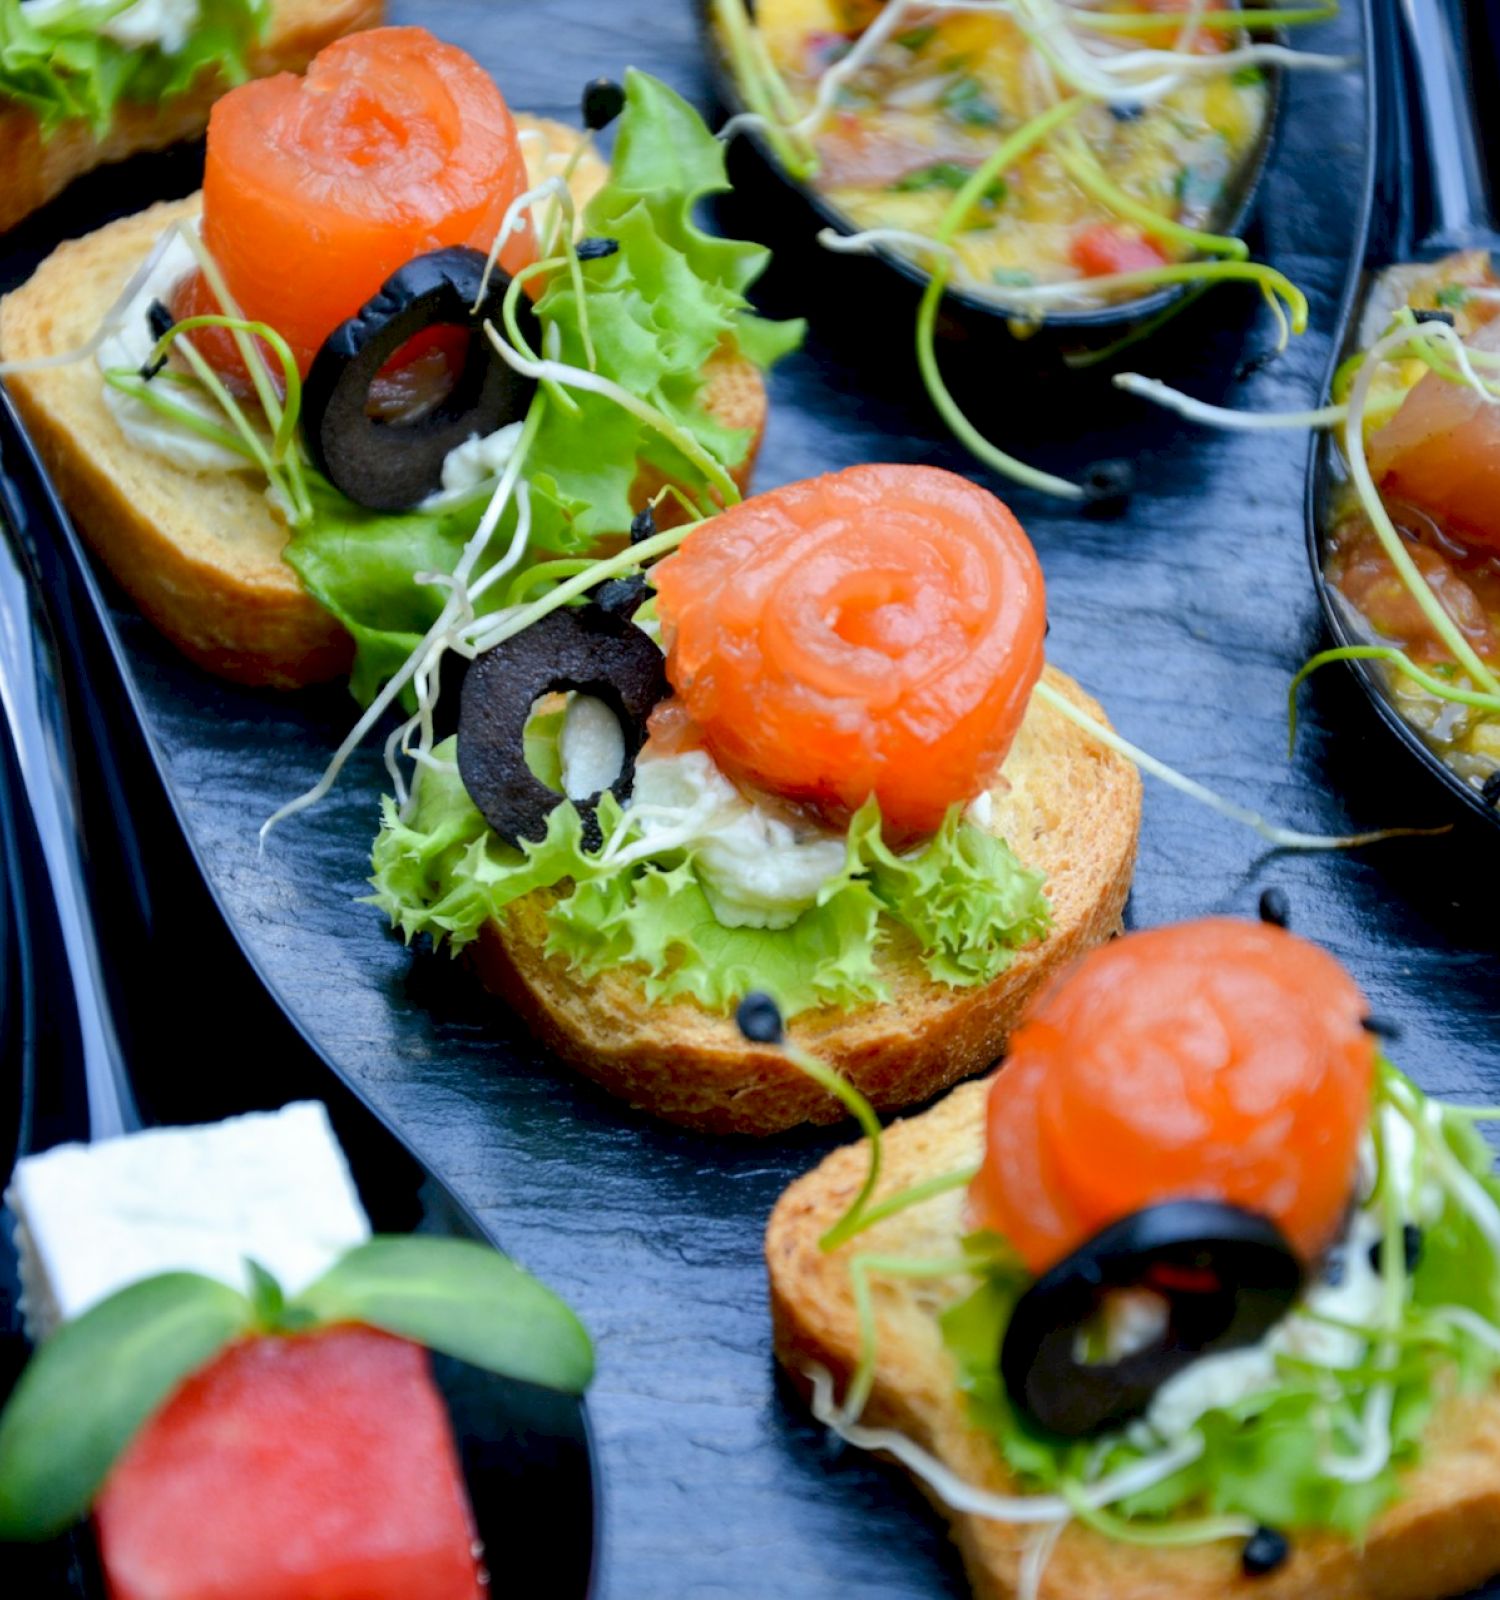 This image shows an assortment of gourmet appetizers, including bruschetta with salmon and black olives, watermelon with cheese, and tuna tartare on spoons.